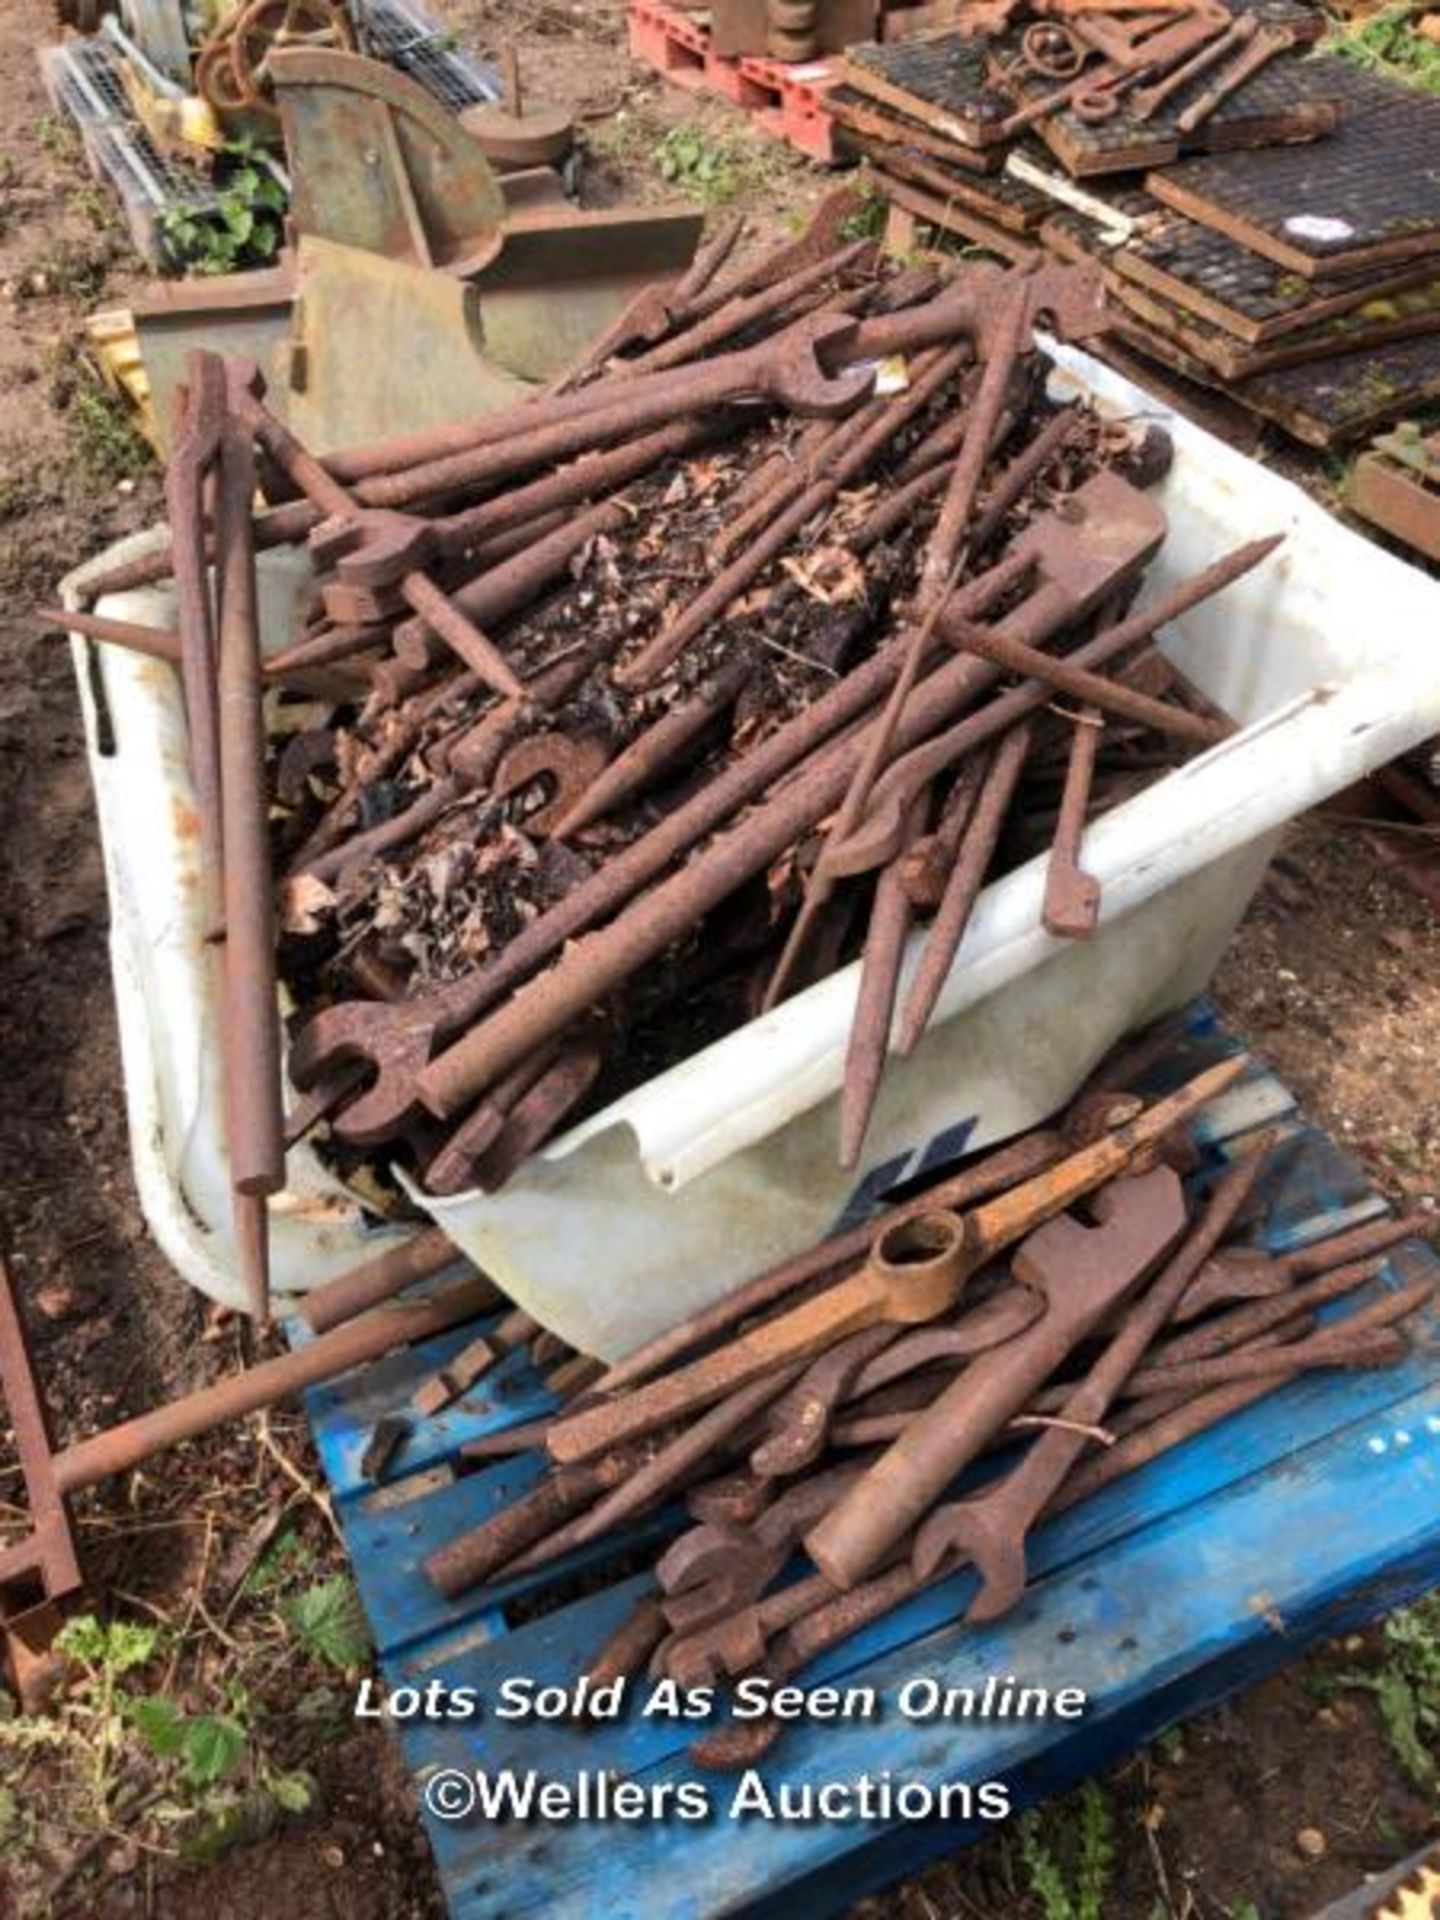 LARGE QUANTITY OF IRON WRENCHES AND ASSOCIATED PARTS - Image 2 of 3